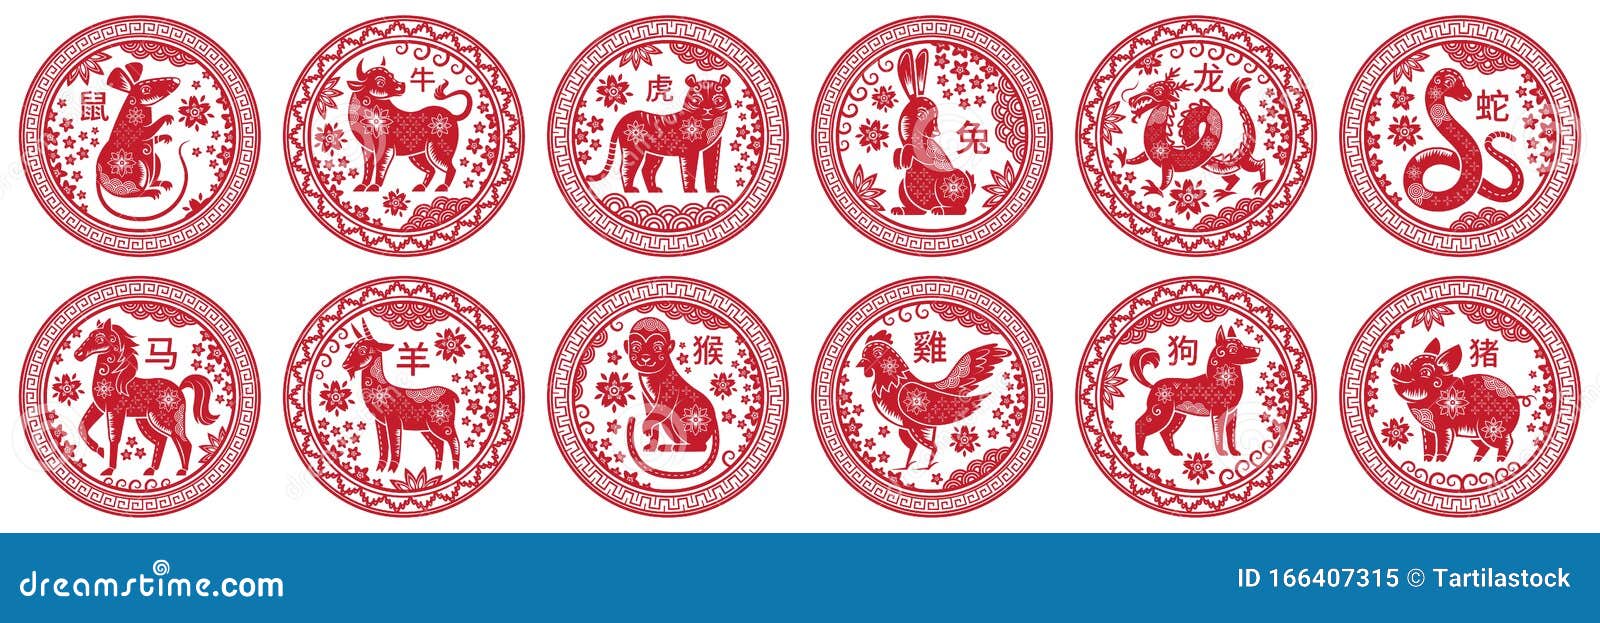 Round Chinese Zodiac Signs Circle Stamps With Animal Of Year China New Year Mascot Symbols Vector Set Stock Vector Illustration Of Horse Symbol 166407315